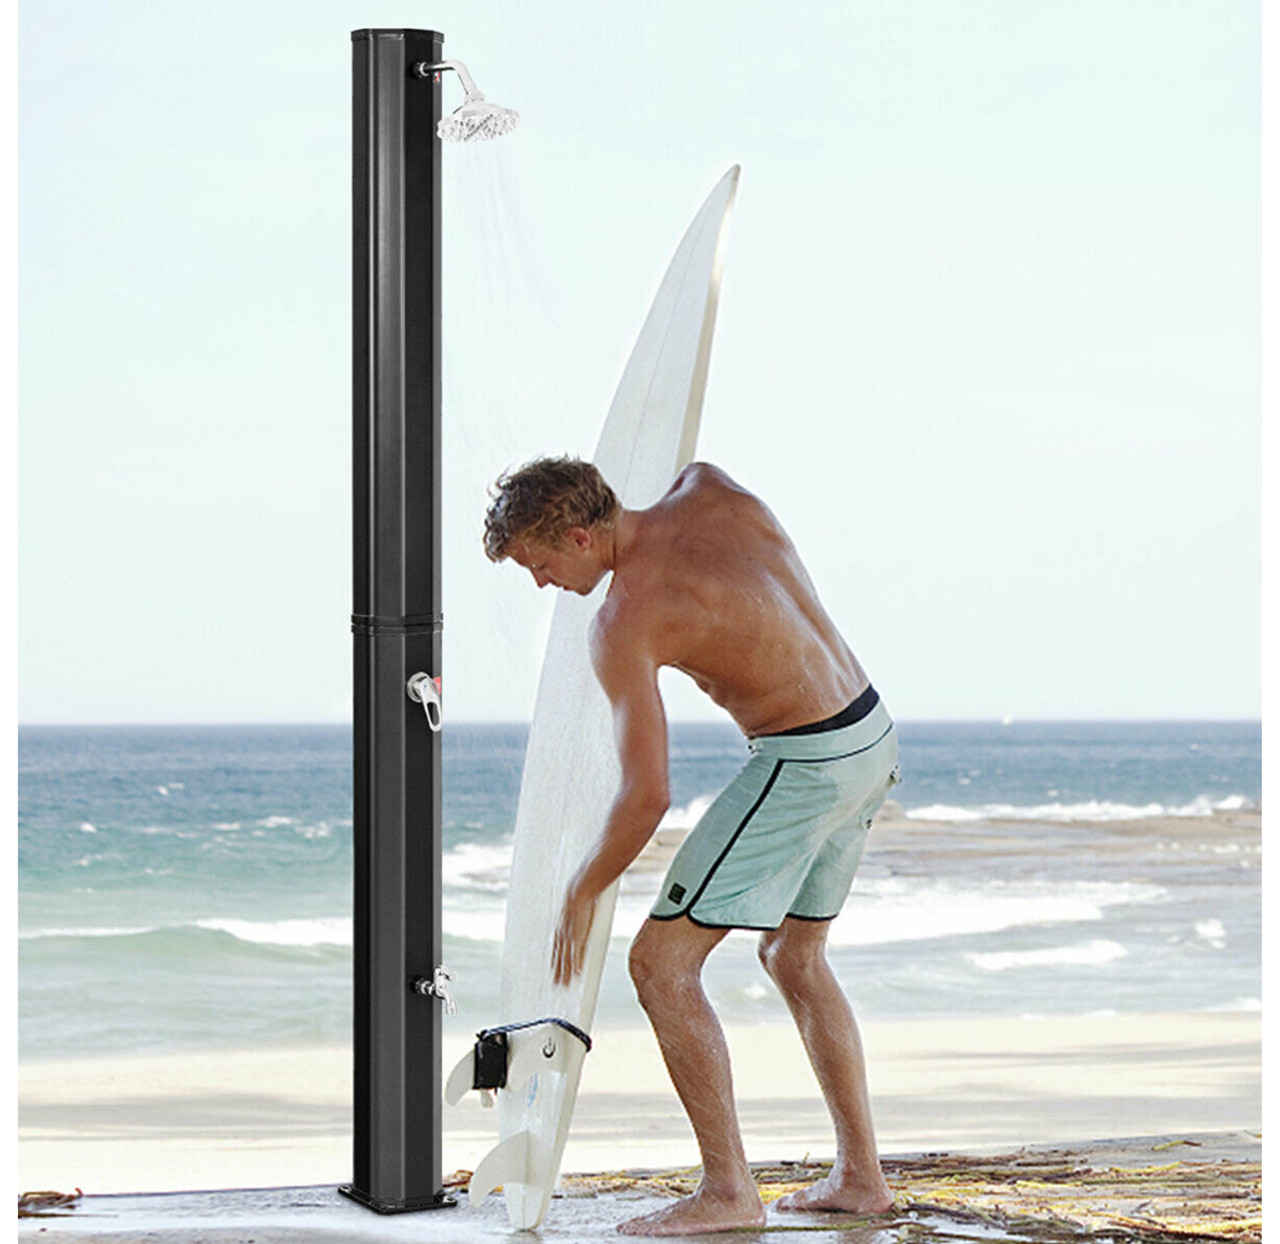 Solar Heating Outdoor Shower, 9.3-Gallon, 7.2-Foot product image